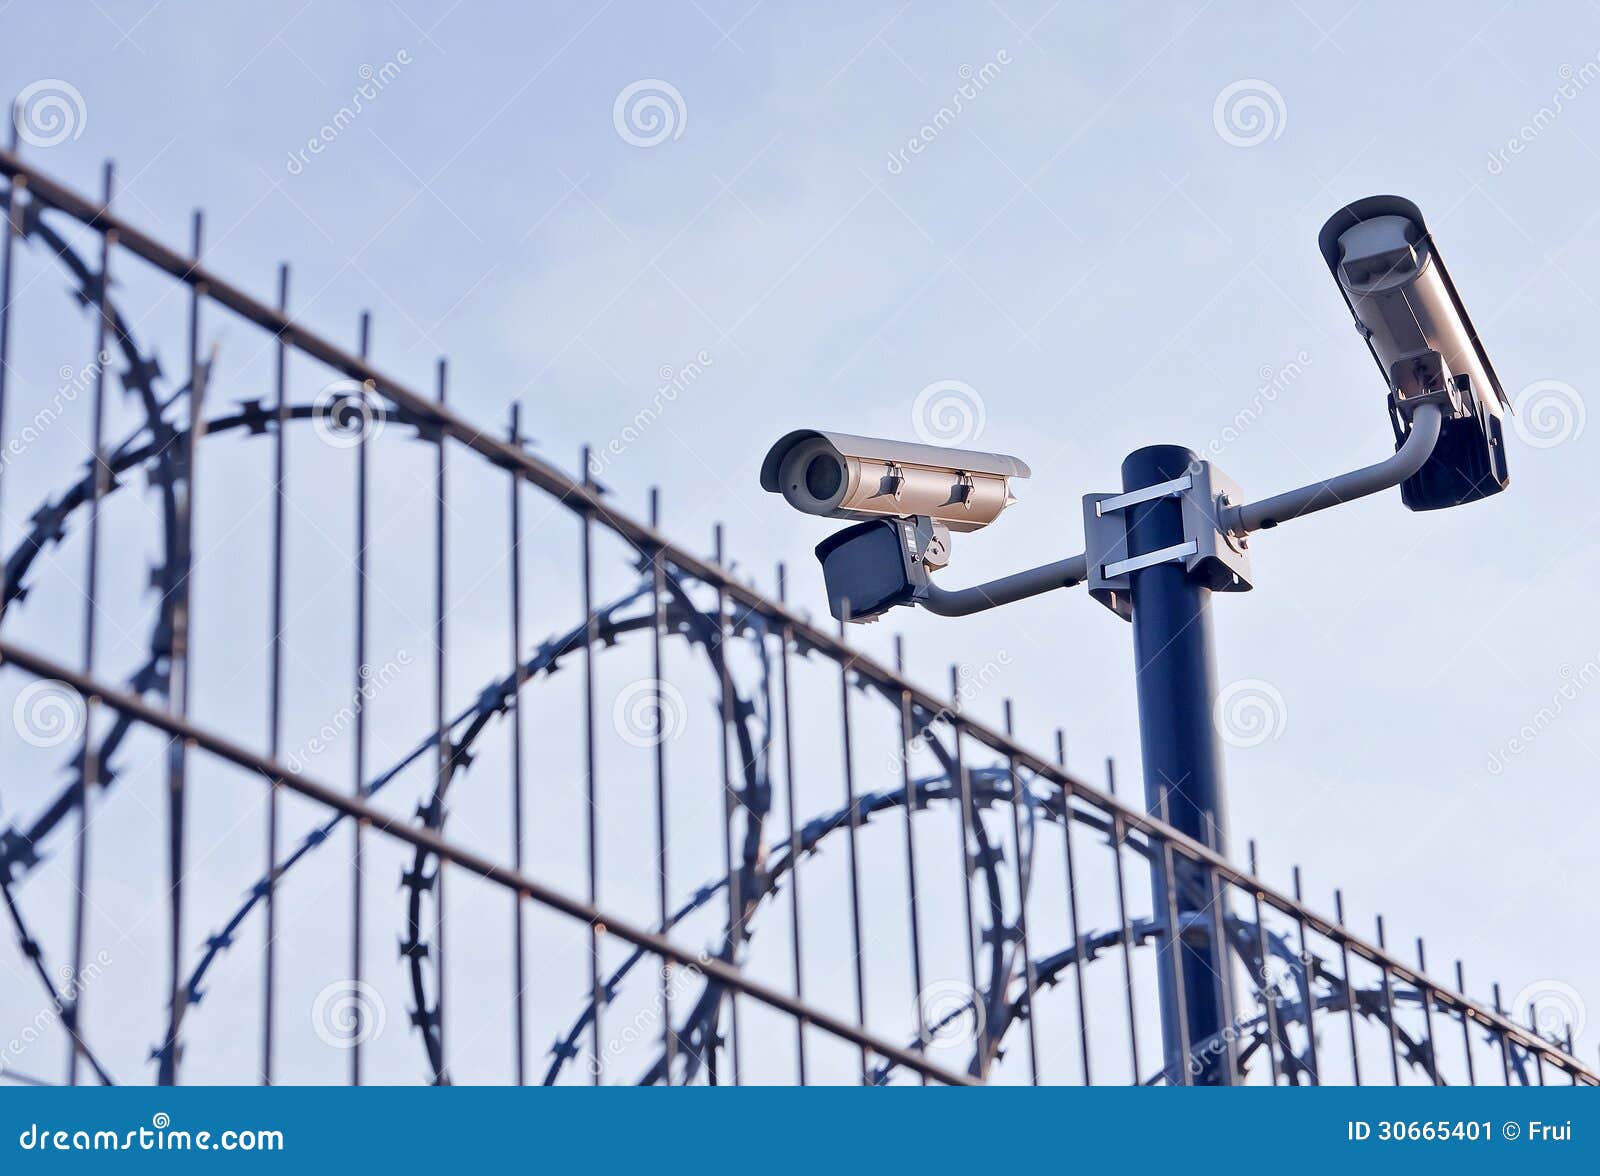 security cameras over fence